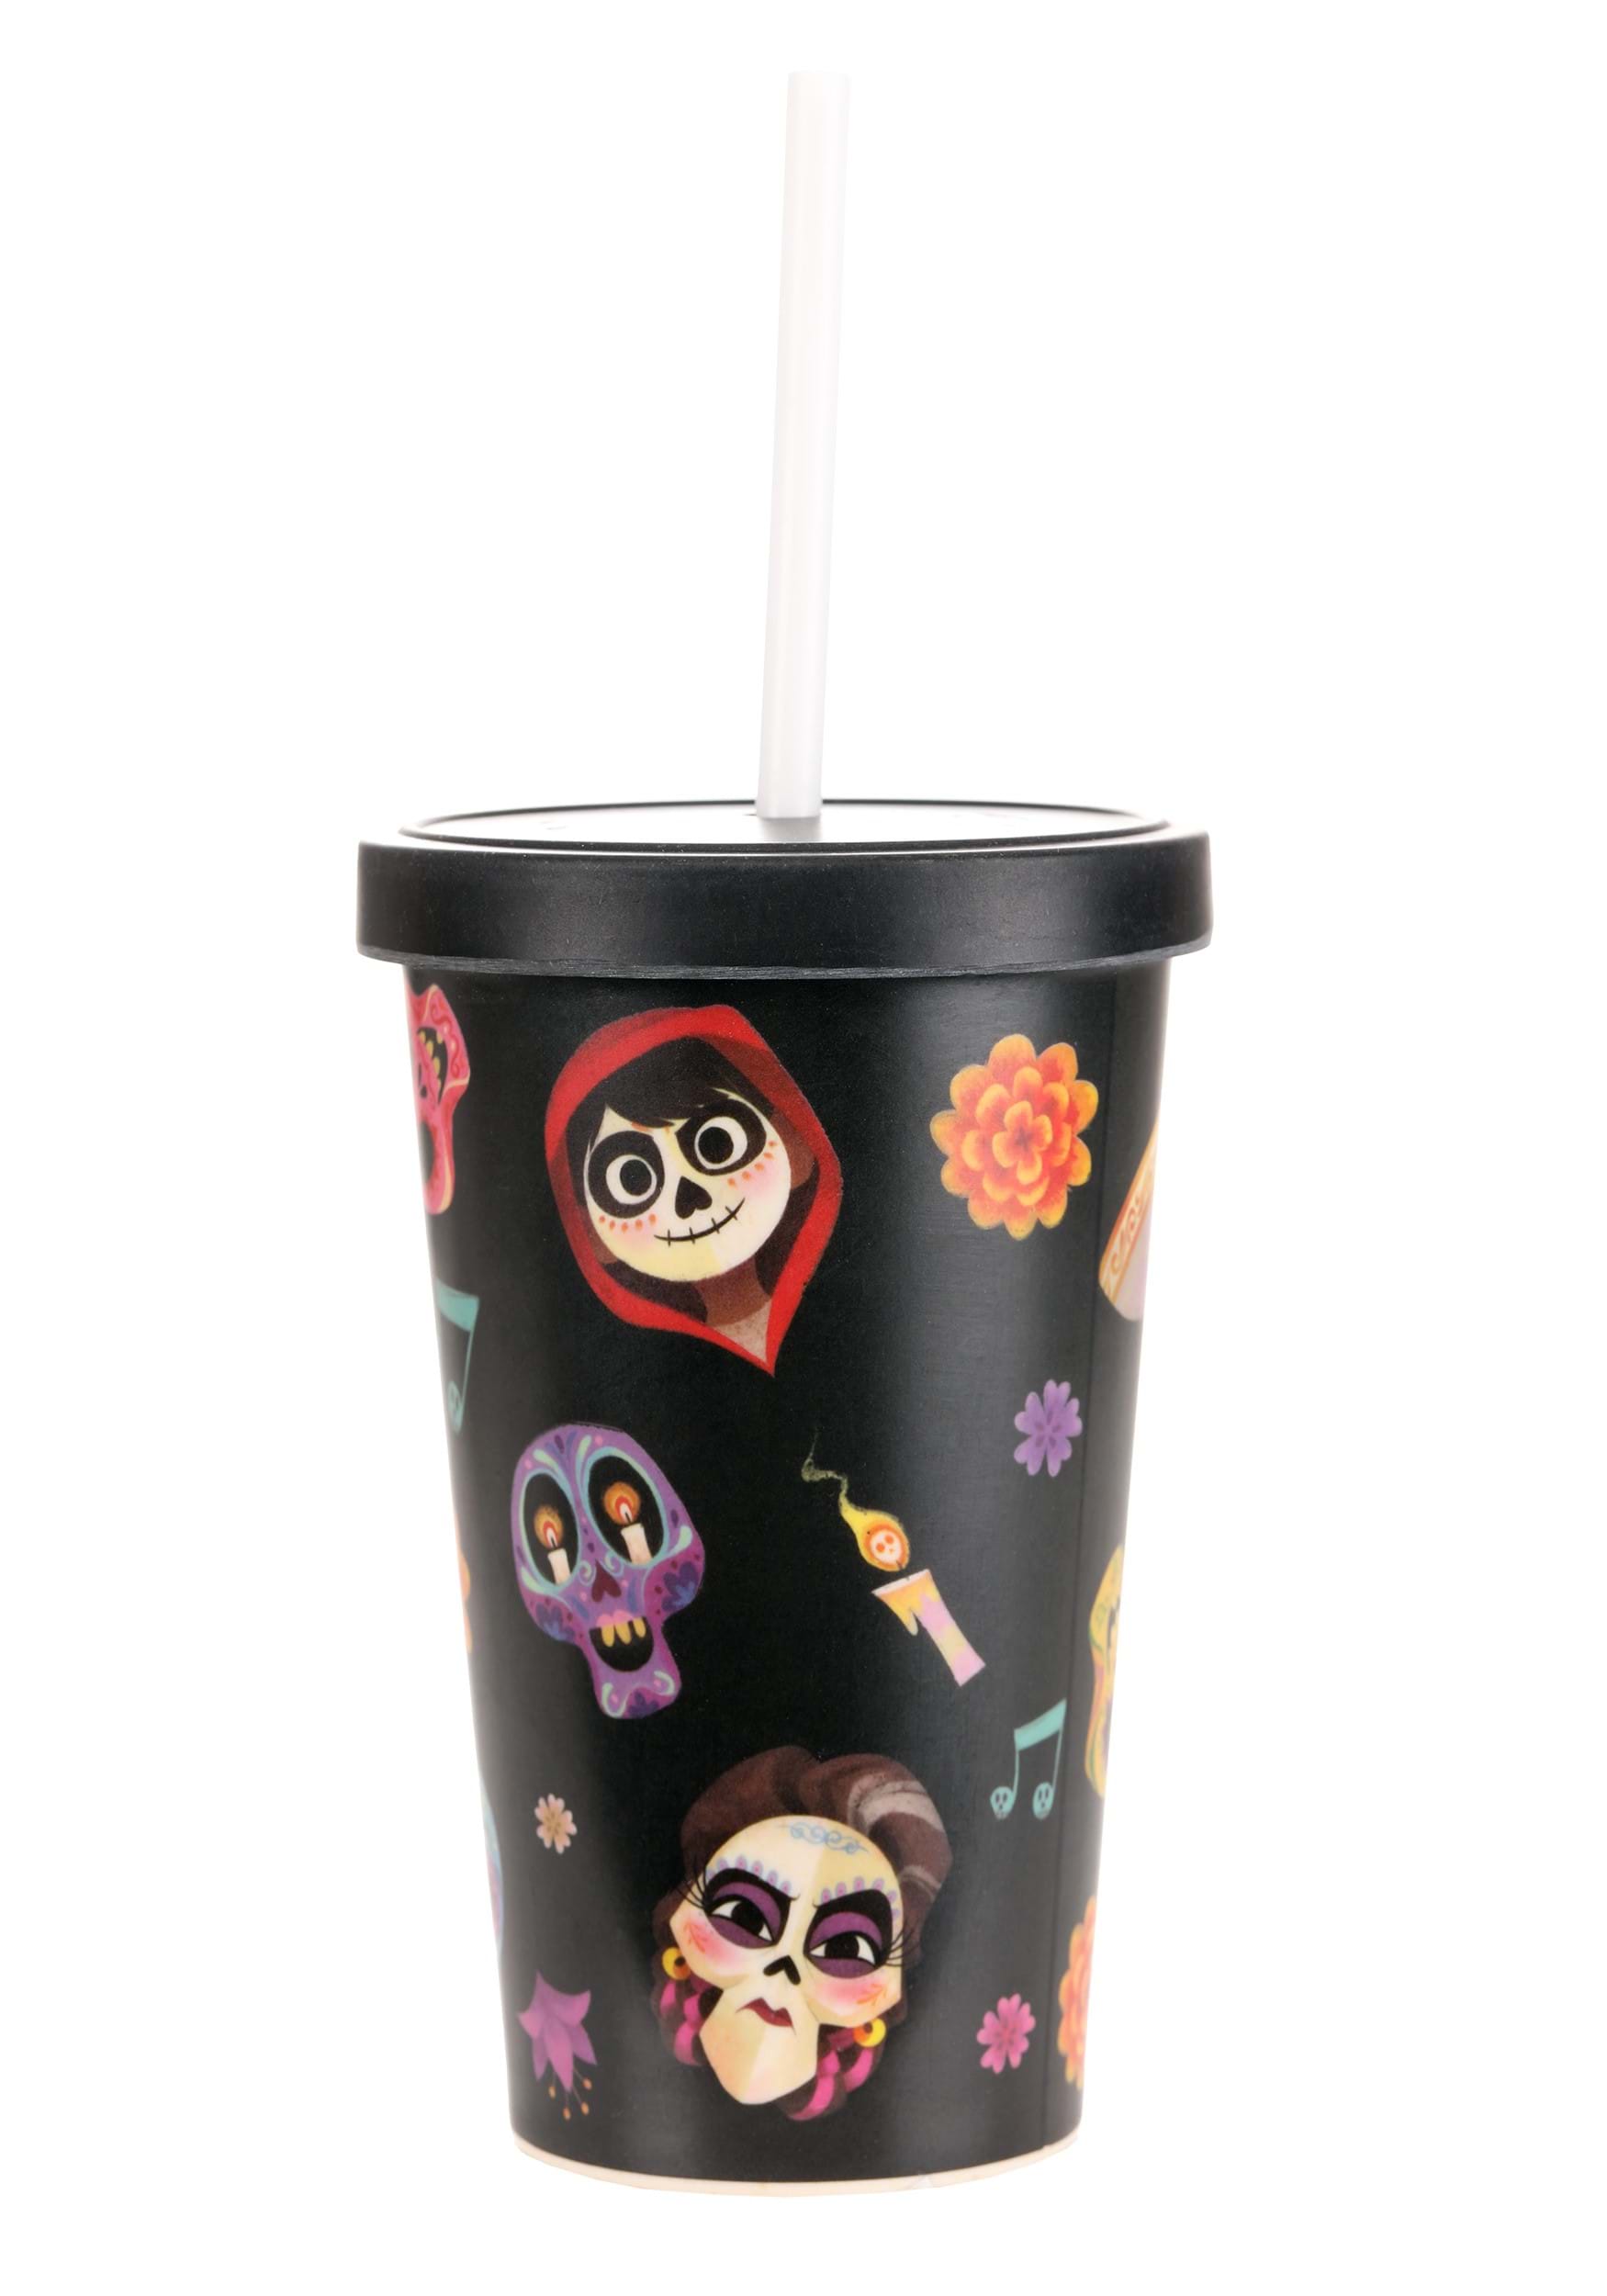 https://images.fun.com/products/88726/1-1/disney-coco-tossed-bamboo-tumbler-with-straw.jpg